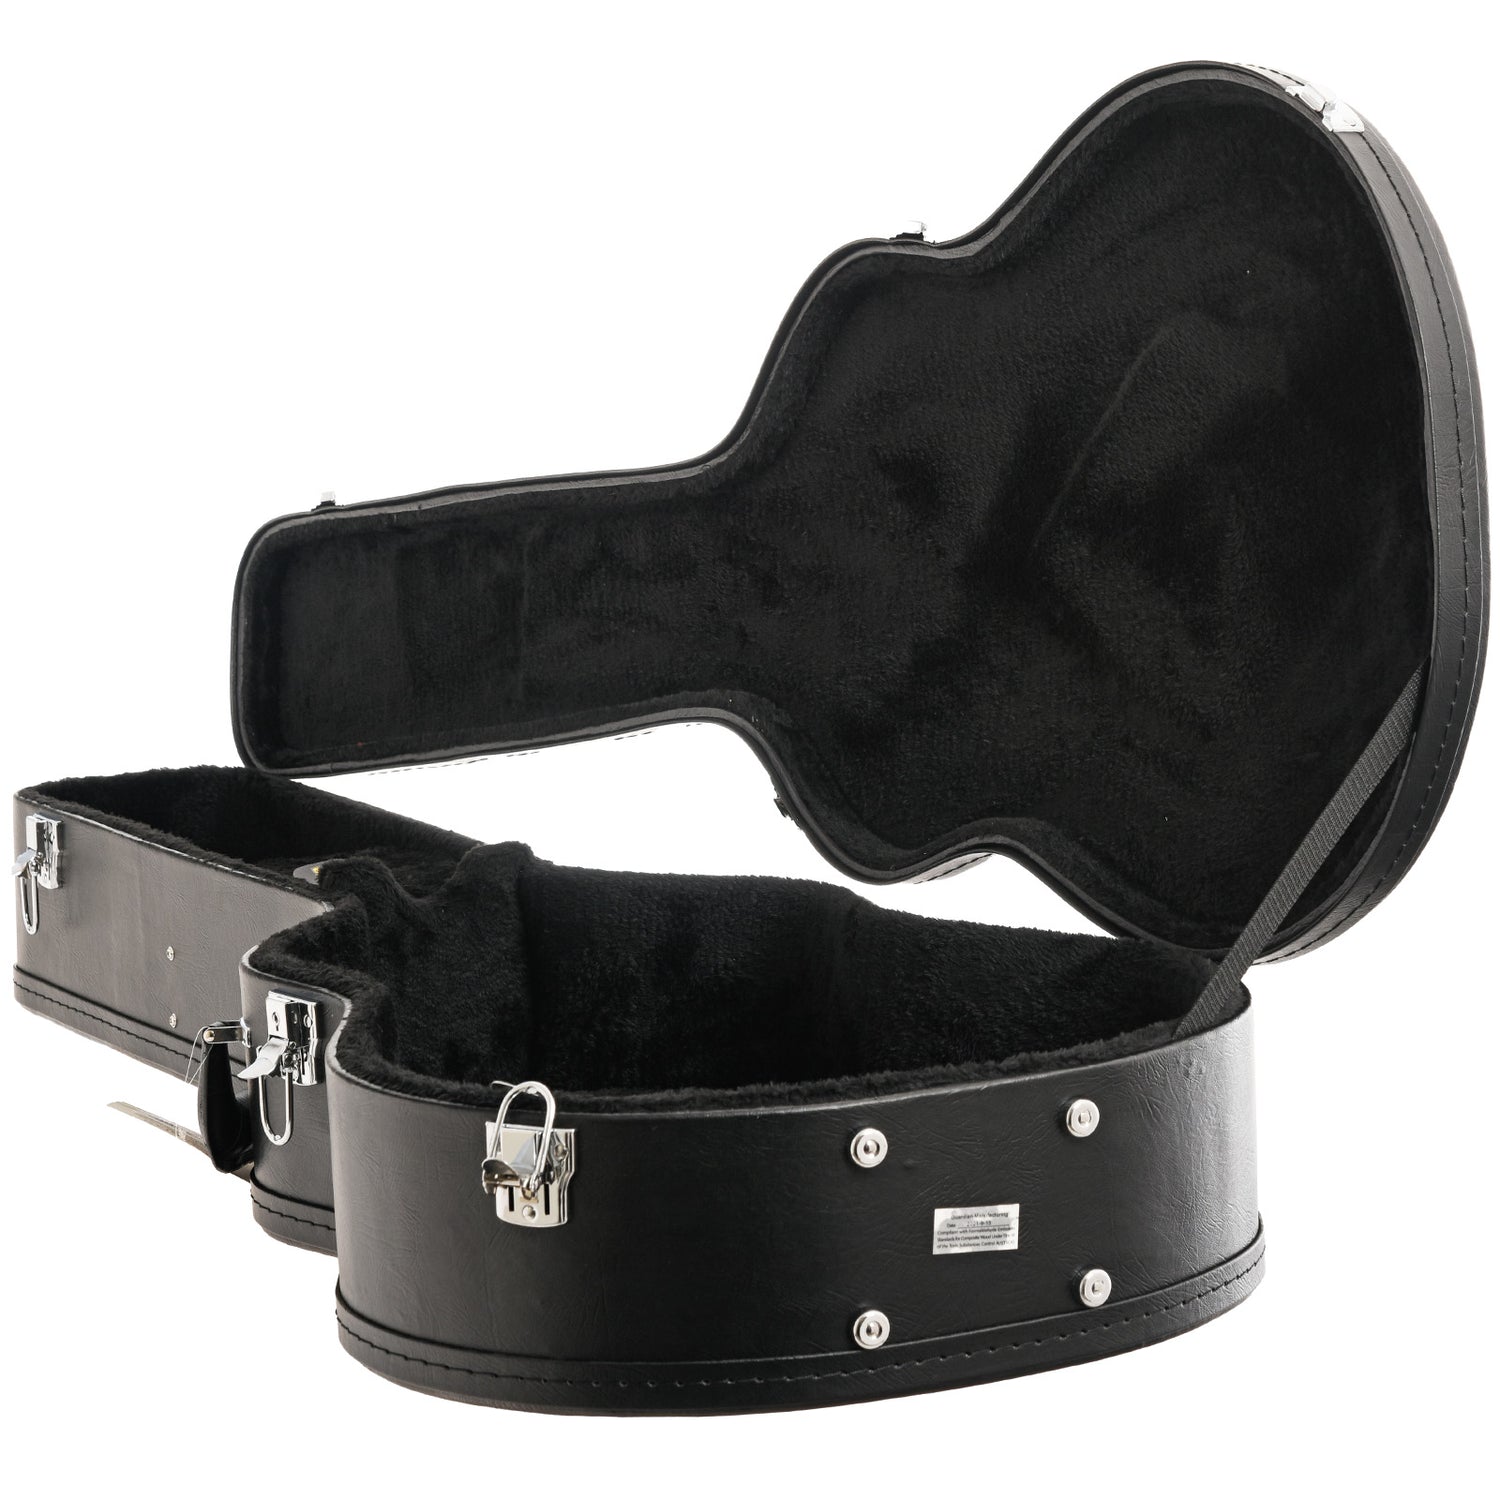 Guardian B-Stock Deluxe Small F Guitar Case opened